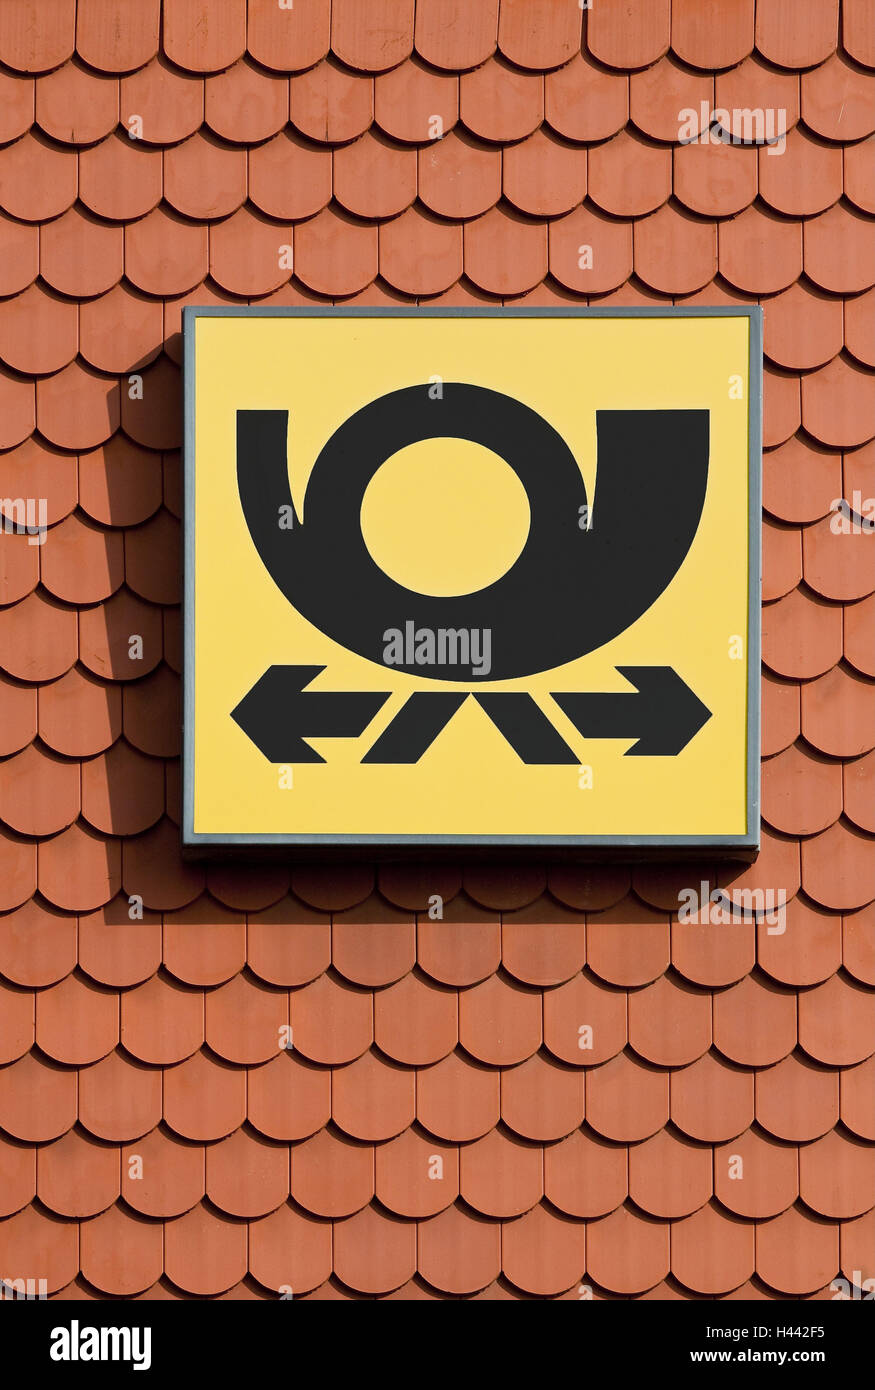 Post, roof, detail, figure, post horn, logo, roofing tiles, post, branch, logo, yellow, logistics, postal branch, red, black, characters, Stock Photo